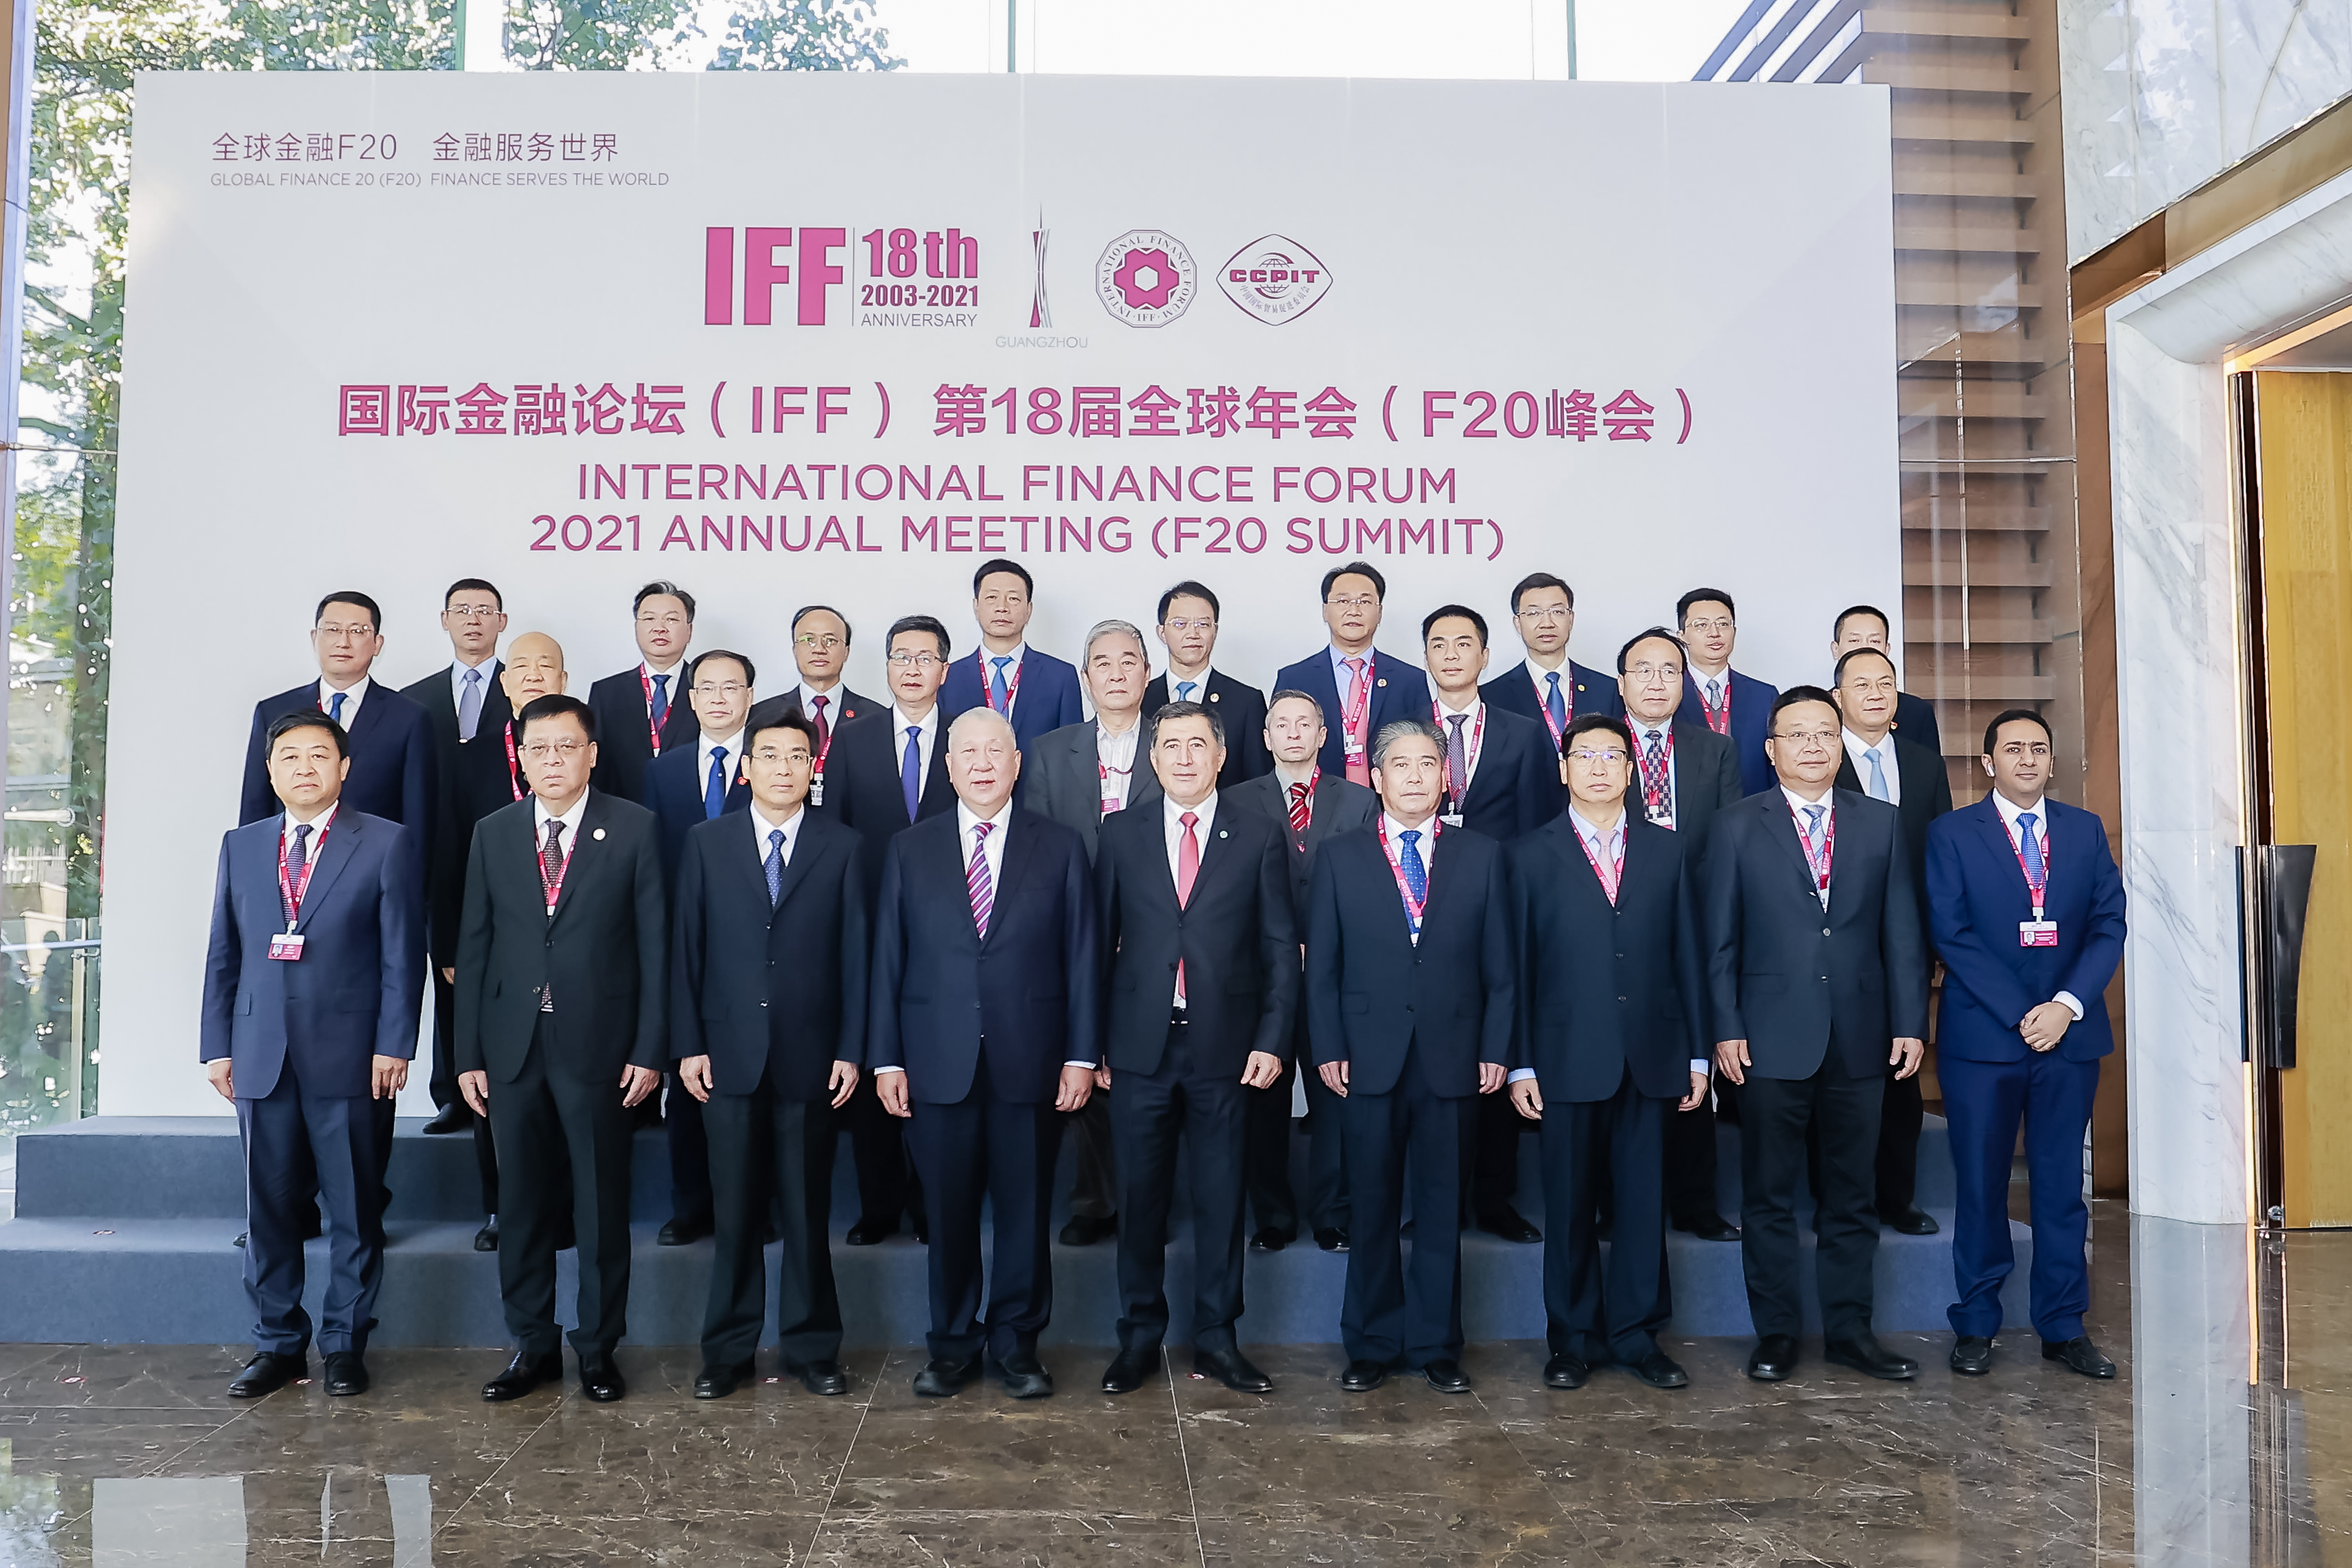 Distinguished guests at IFF 2021 Annual Meeting